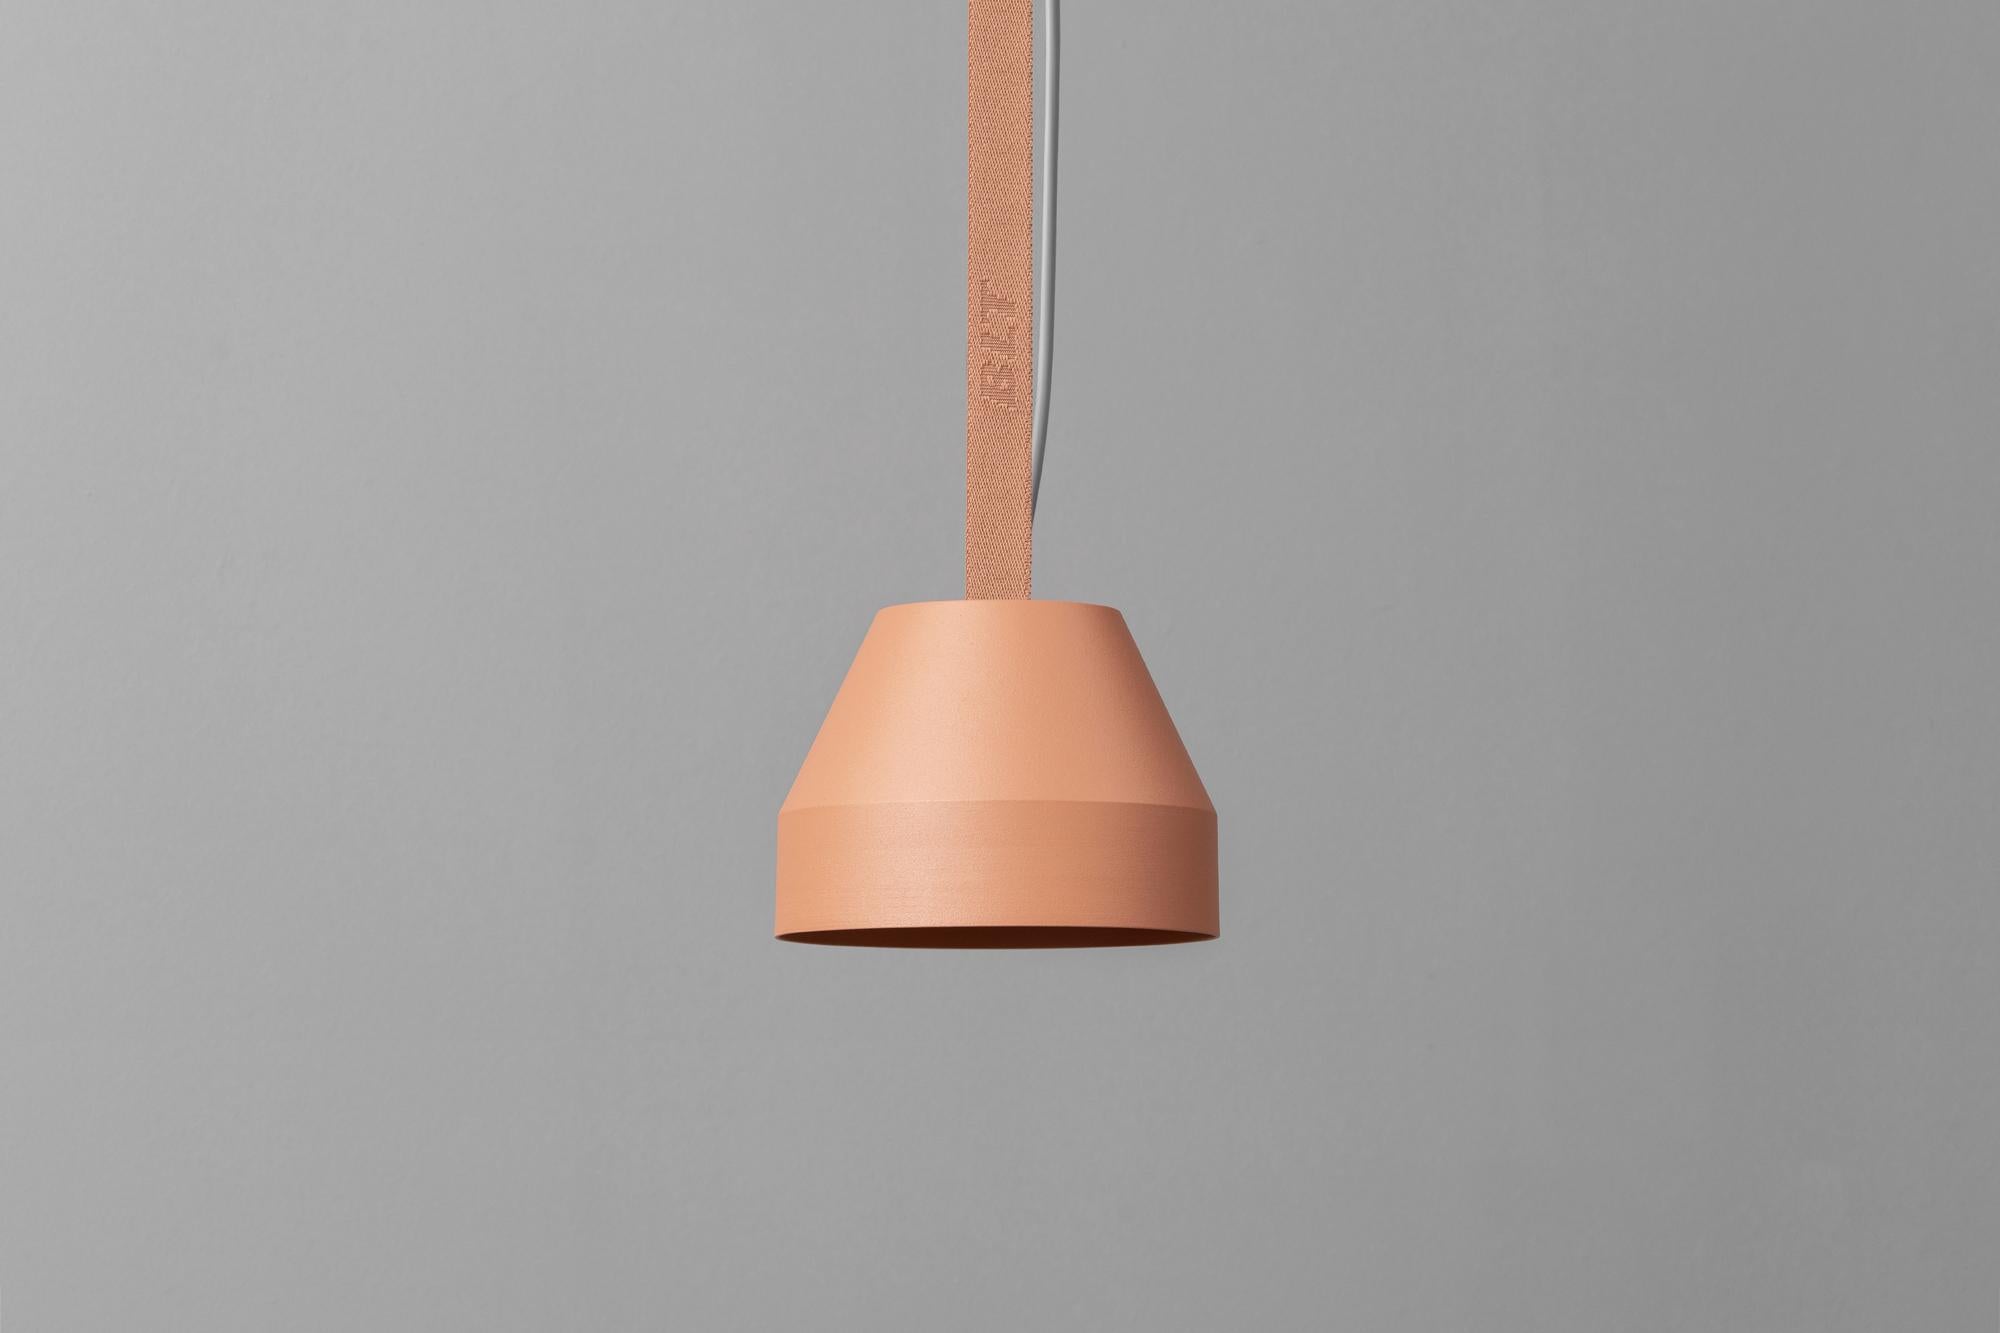 BLT_CAP Small Coral Pendant Lamp by +kouple
Dimensions: Ø 16 x H 12 cm. 
Materials: Powder-coated steel and textile.

Available in different color options. The rod length is 250 cm. Please contact us.

All our lamps can be wired according to each